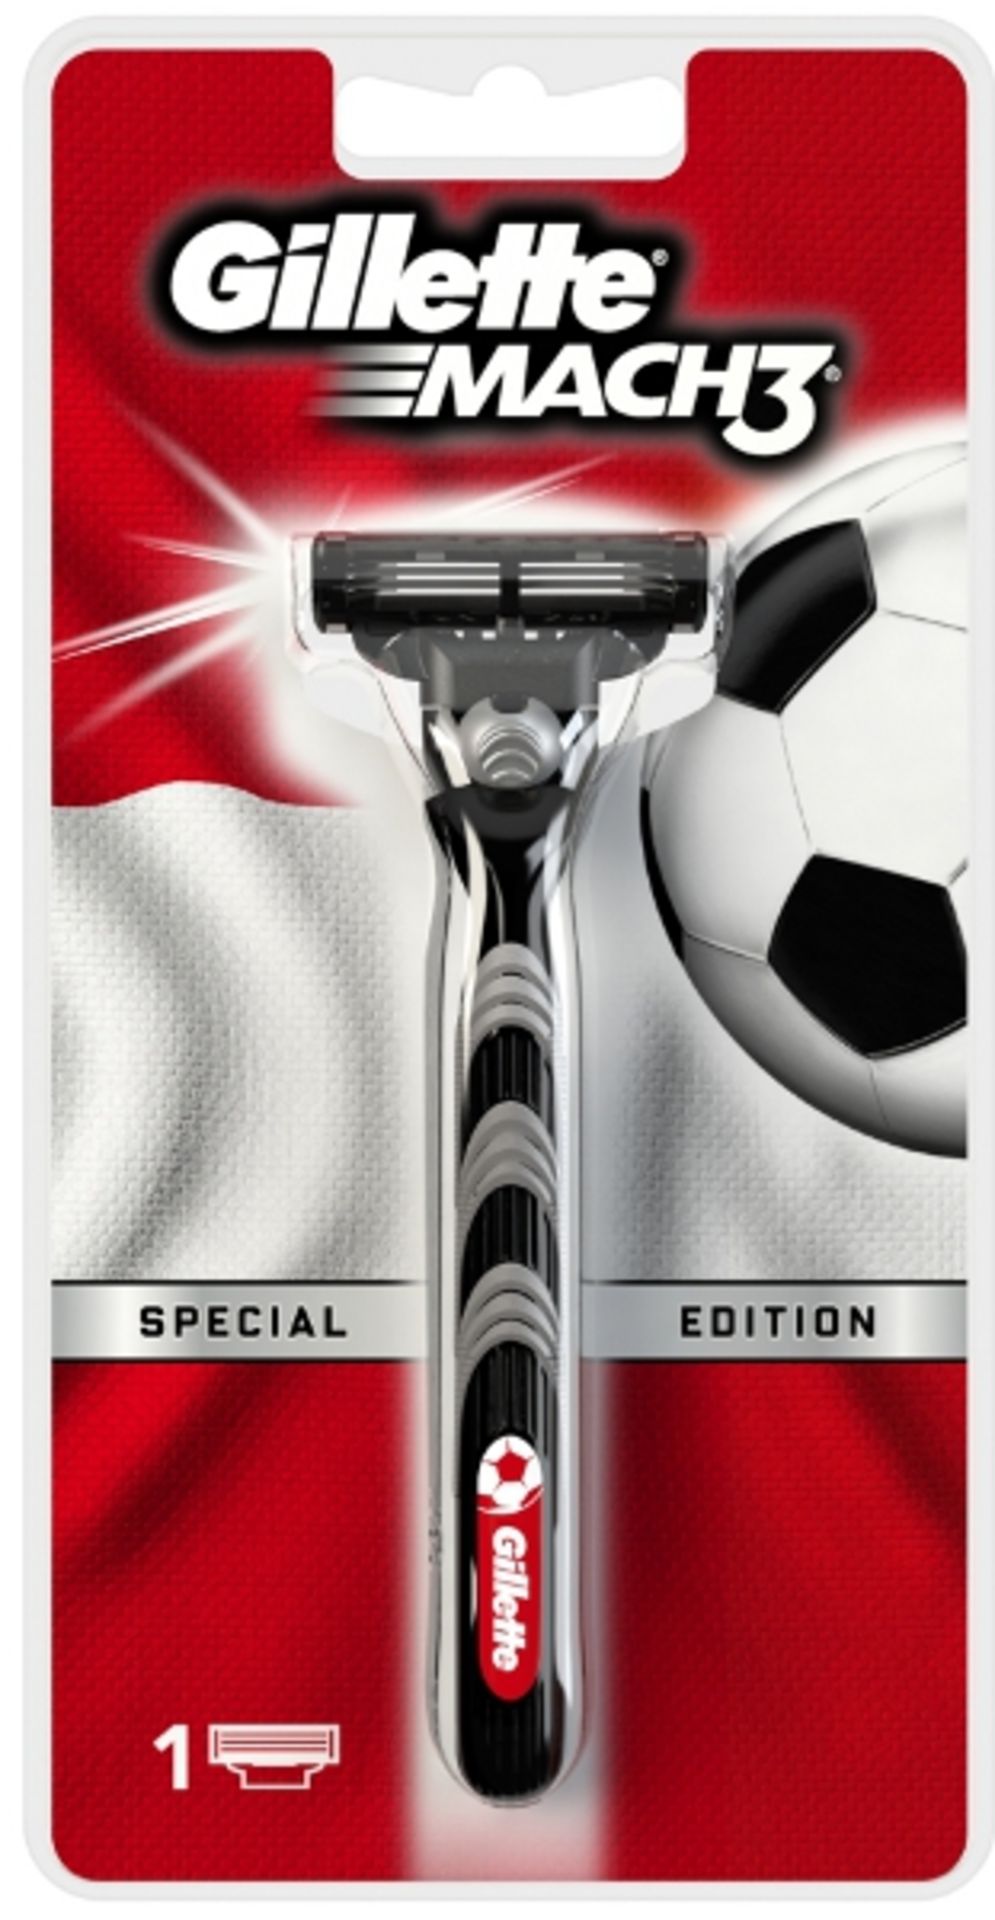 V *TRADE QTY* Brand New Gillette Mach3 Football Special Edition X 3 YOUR BID PRICE TO BE